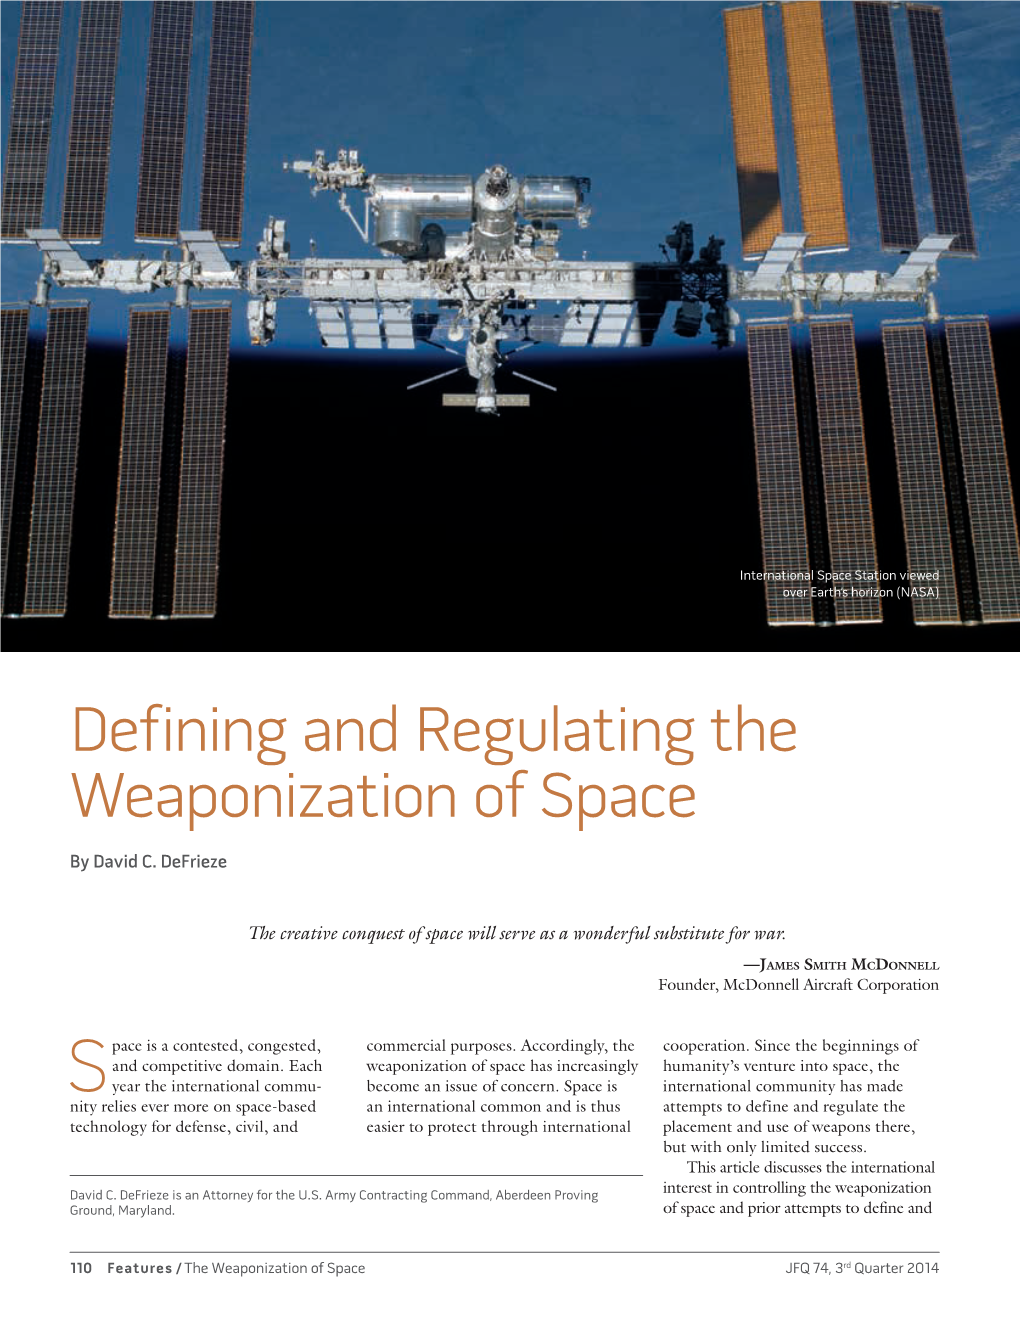 Defining and Regulating the Weaponization of Space